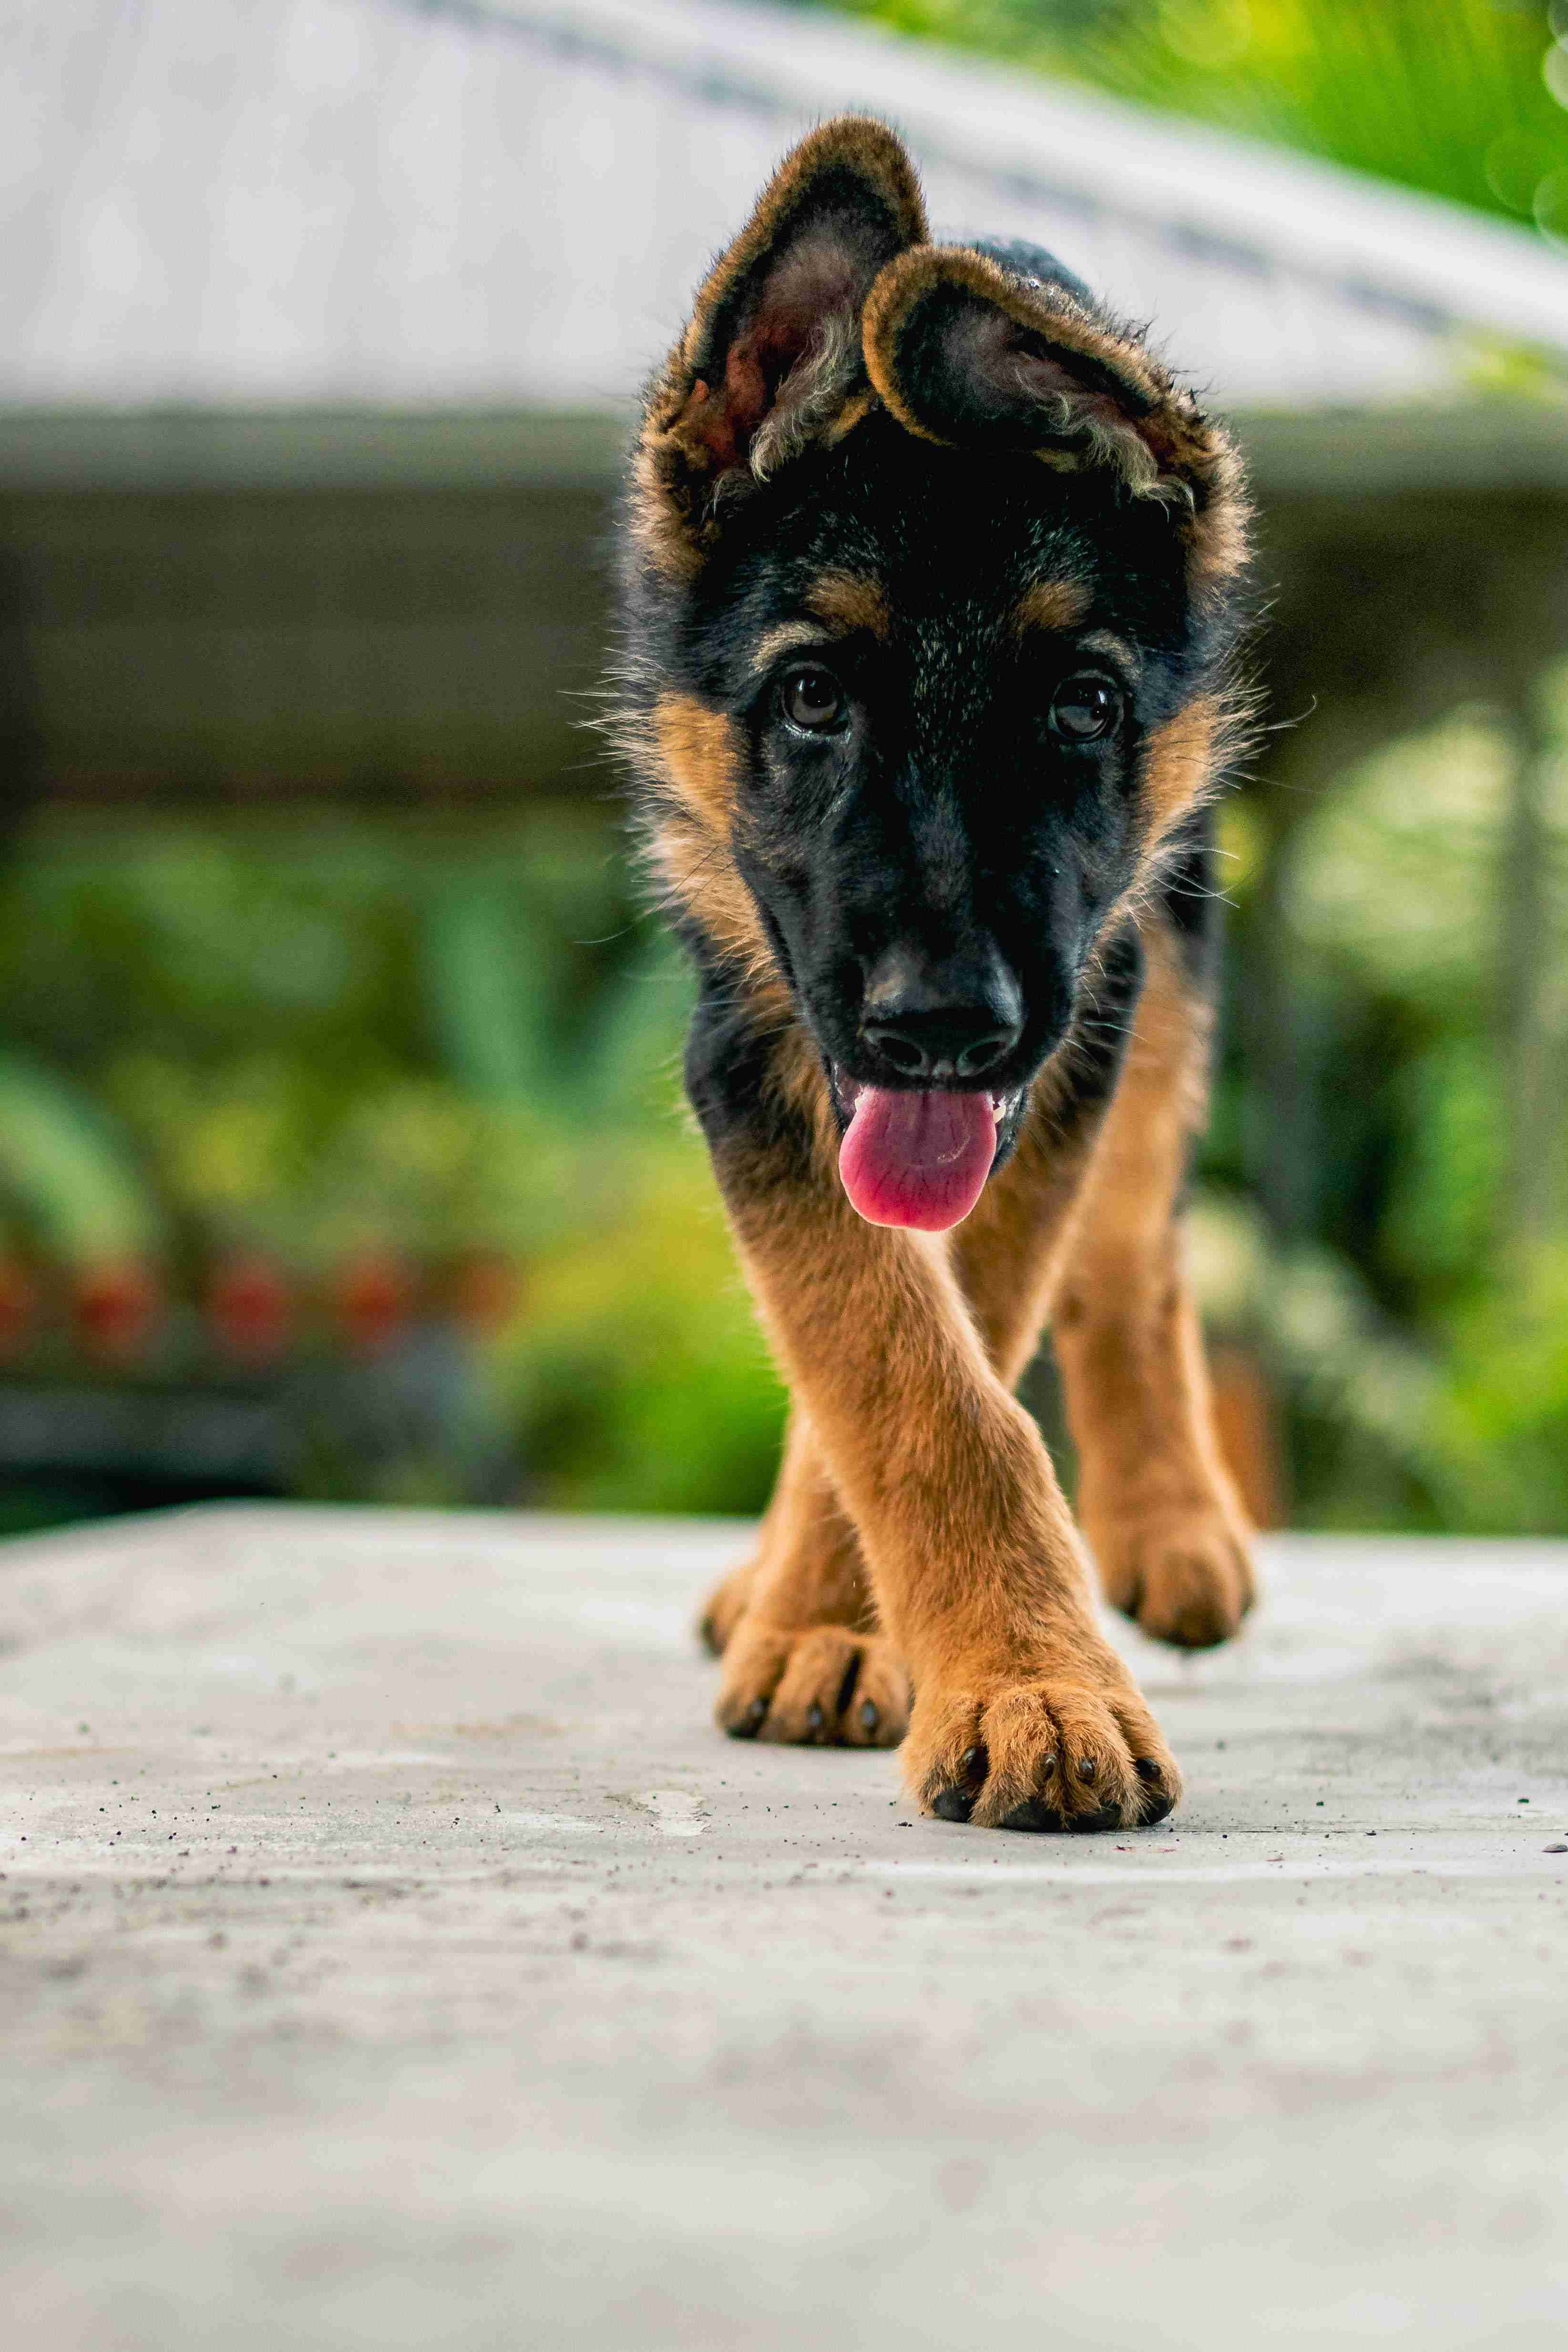 What are some good ways to teach a German Shepherd puppy to come when called?